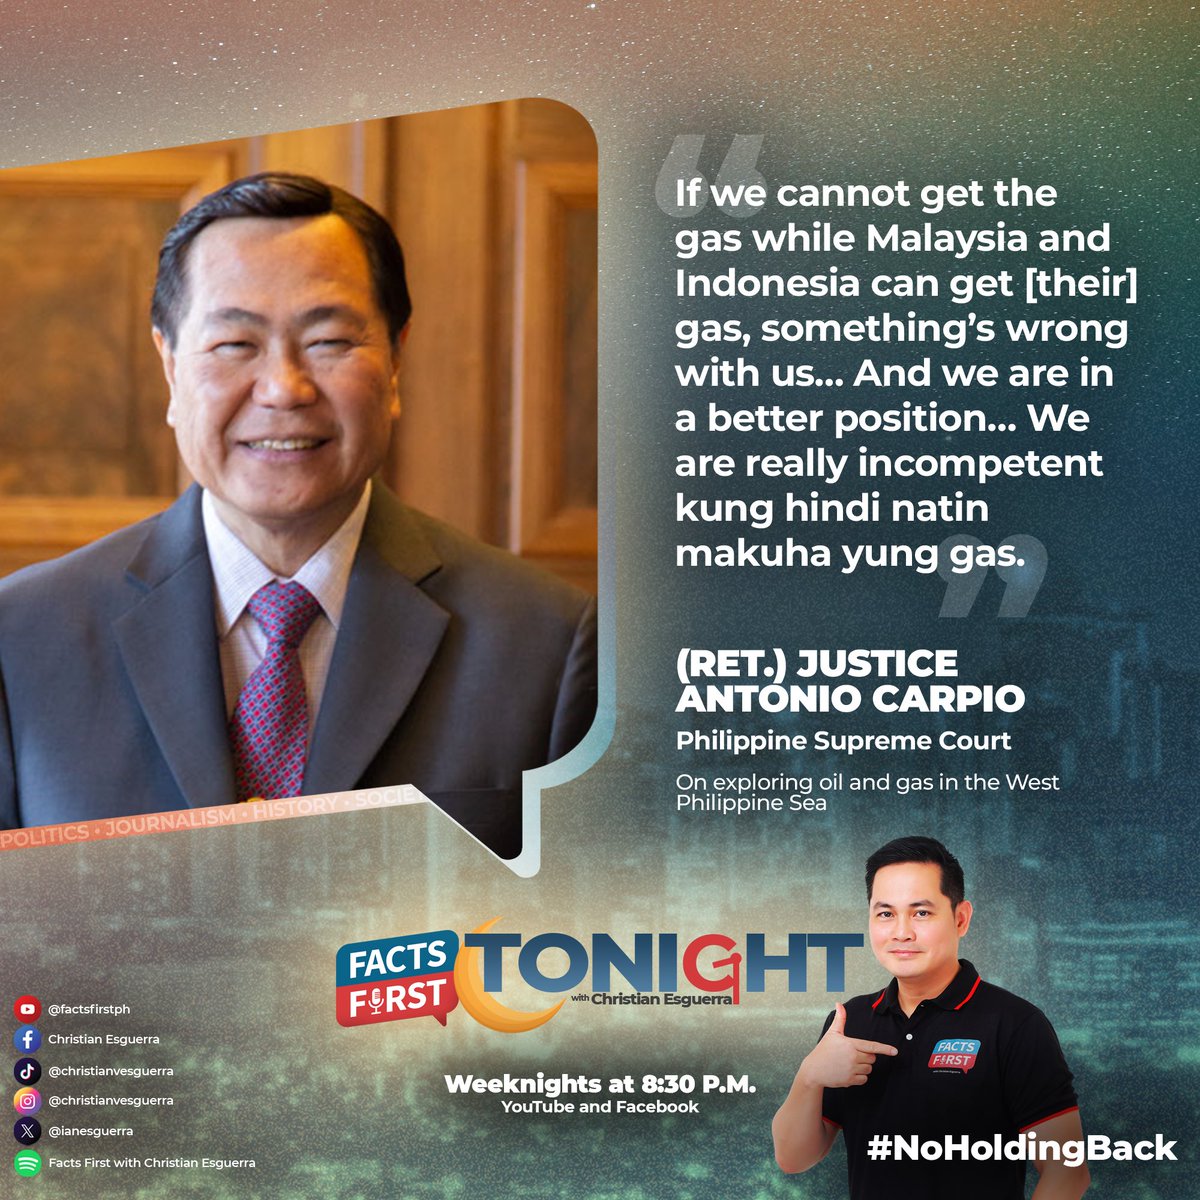 Former Supreme Court Senior Associate Justice Tony Carpio says “we are really incompetent” if the Philippines cannot explore oil and gas in our own exclusive economic zone. 

Watch our #FactsFirst interview here:
youtube.com/live/37a7t1eJ1…